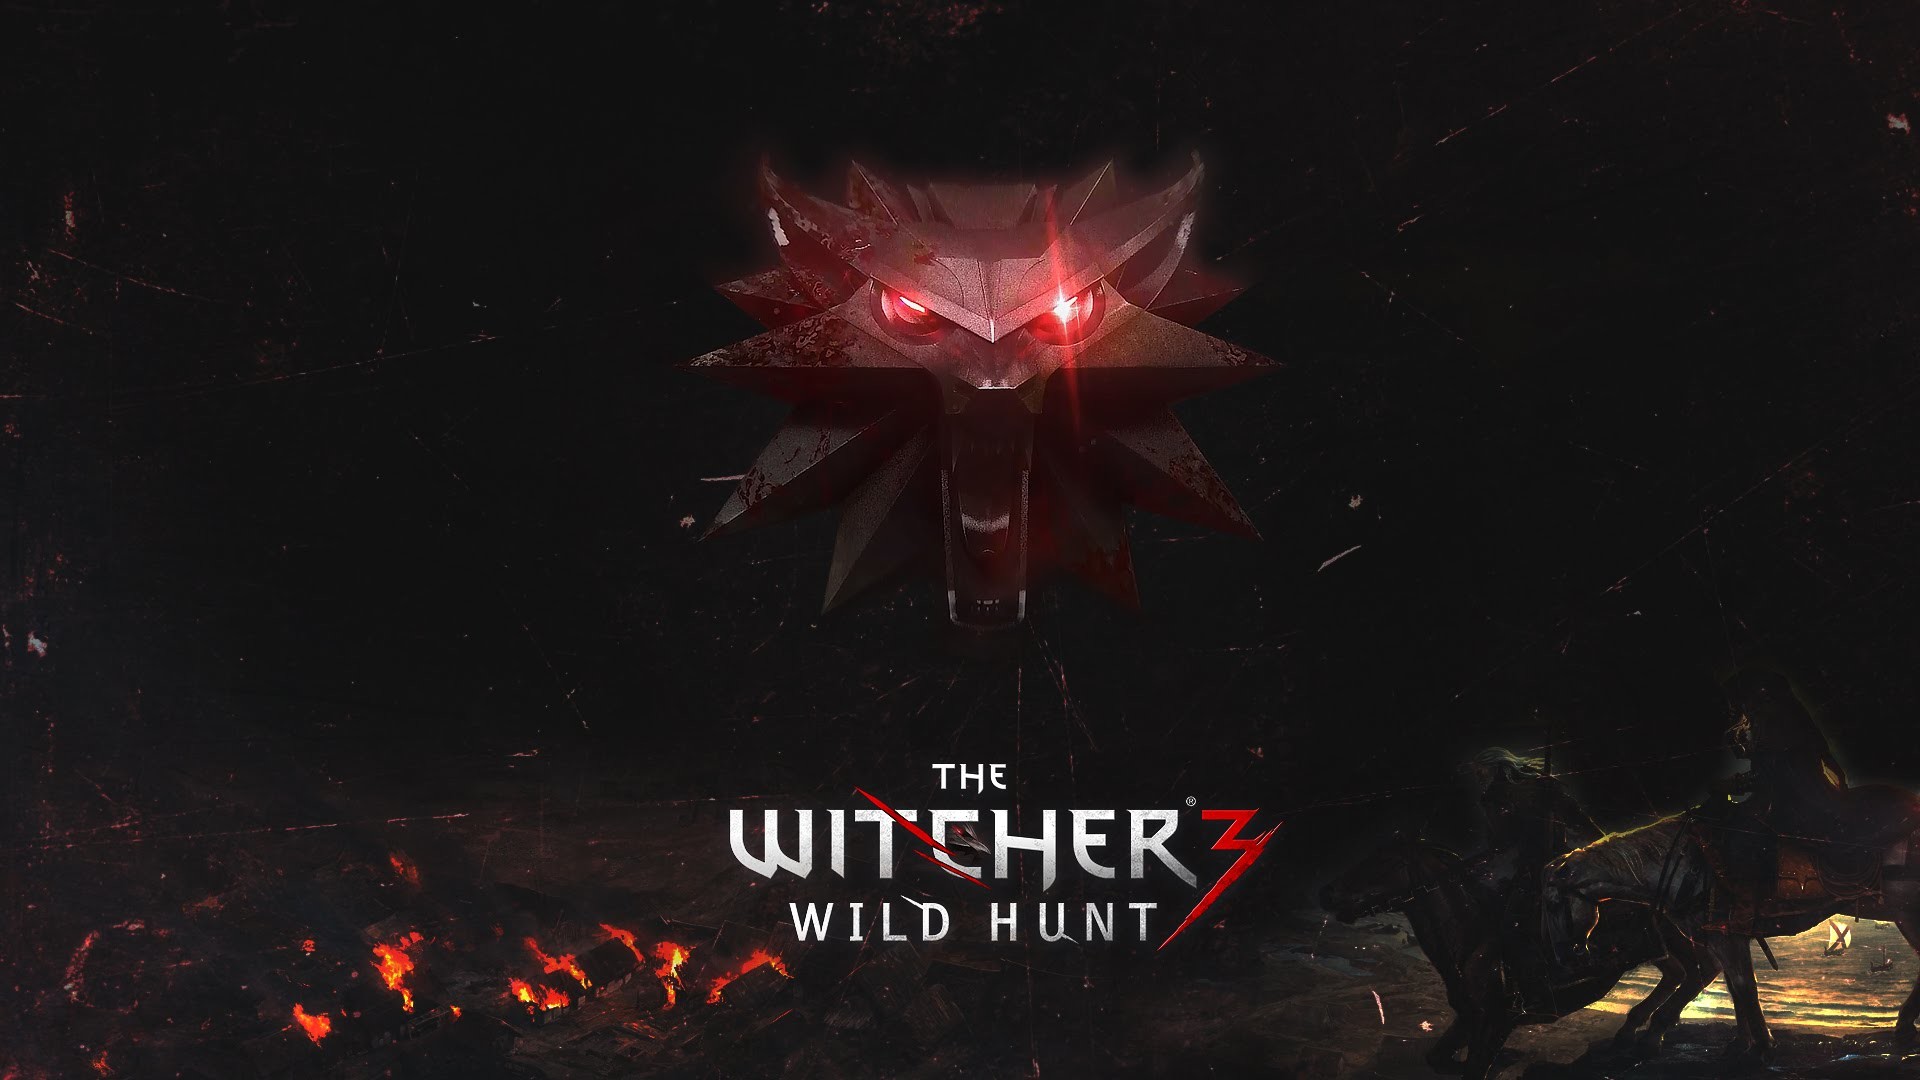 1920x1080 The Witcher 3 Wild Hunt SlideShow | 34 beautiful wallpaper with scenes from  games | 1080p - YouTube